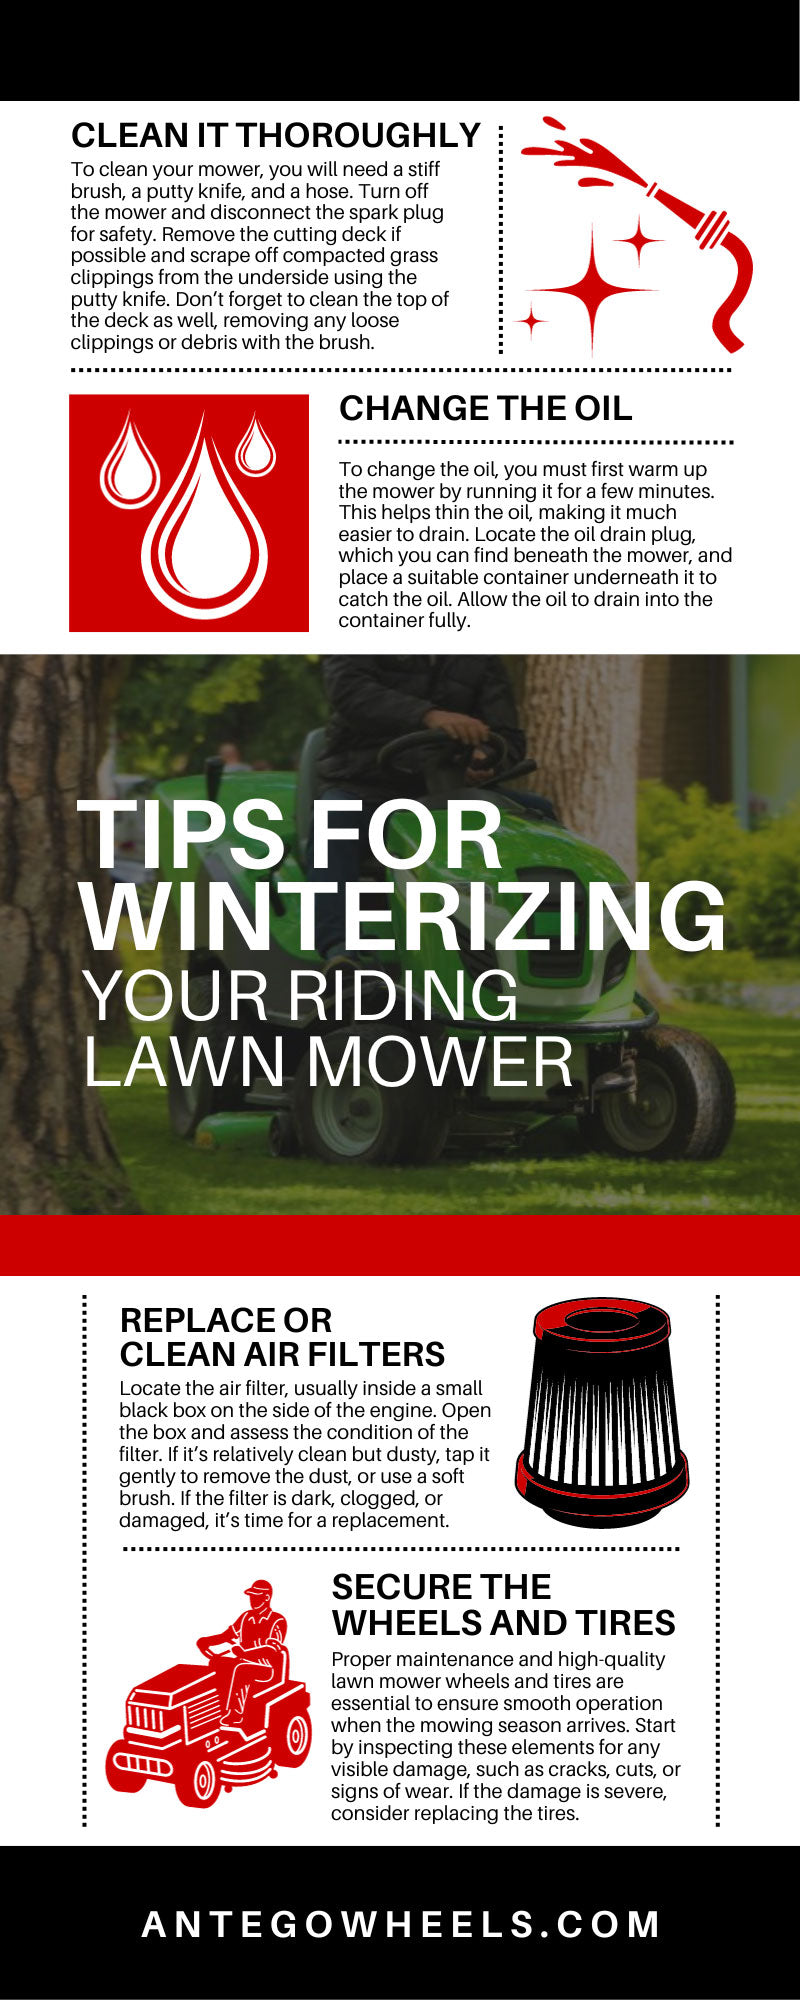 Tips for Winterizing Your Riding Lawn Mower